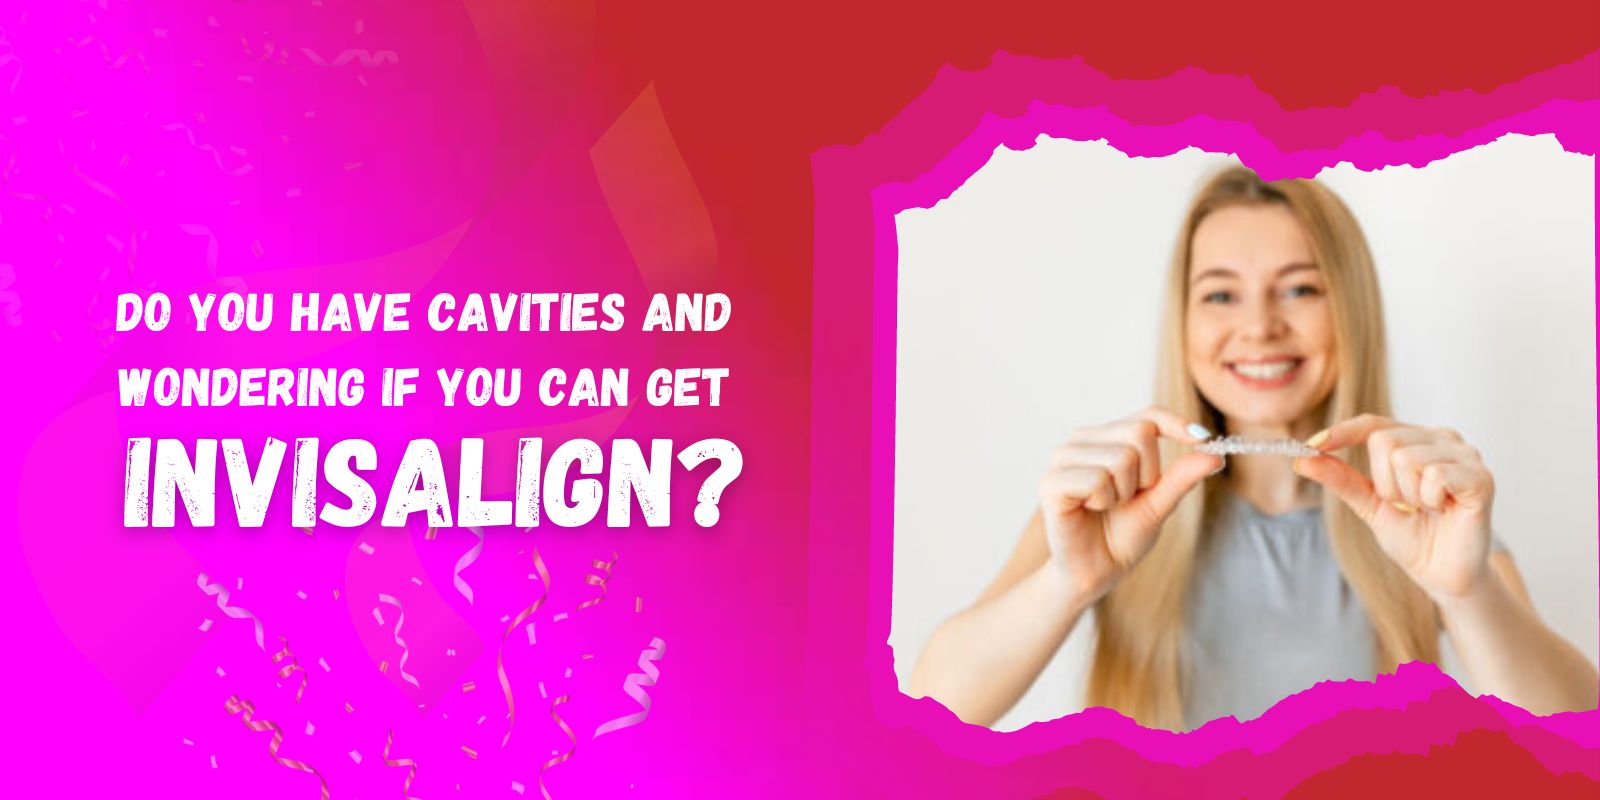 Do You Have Cavities and Wondering If You Can Get Invisalign?